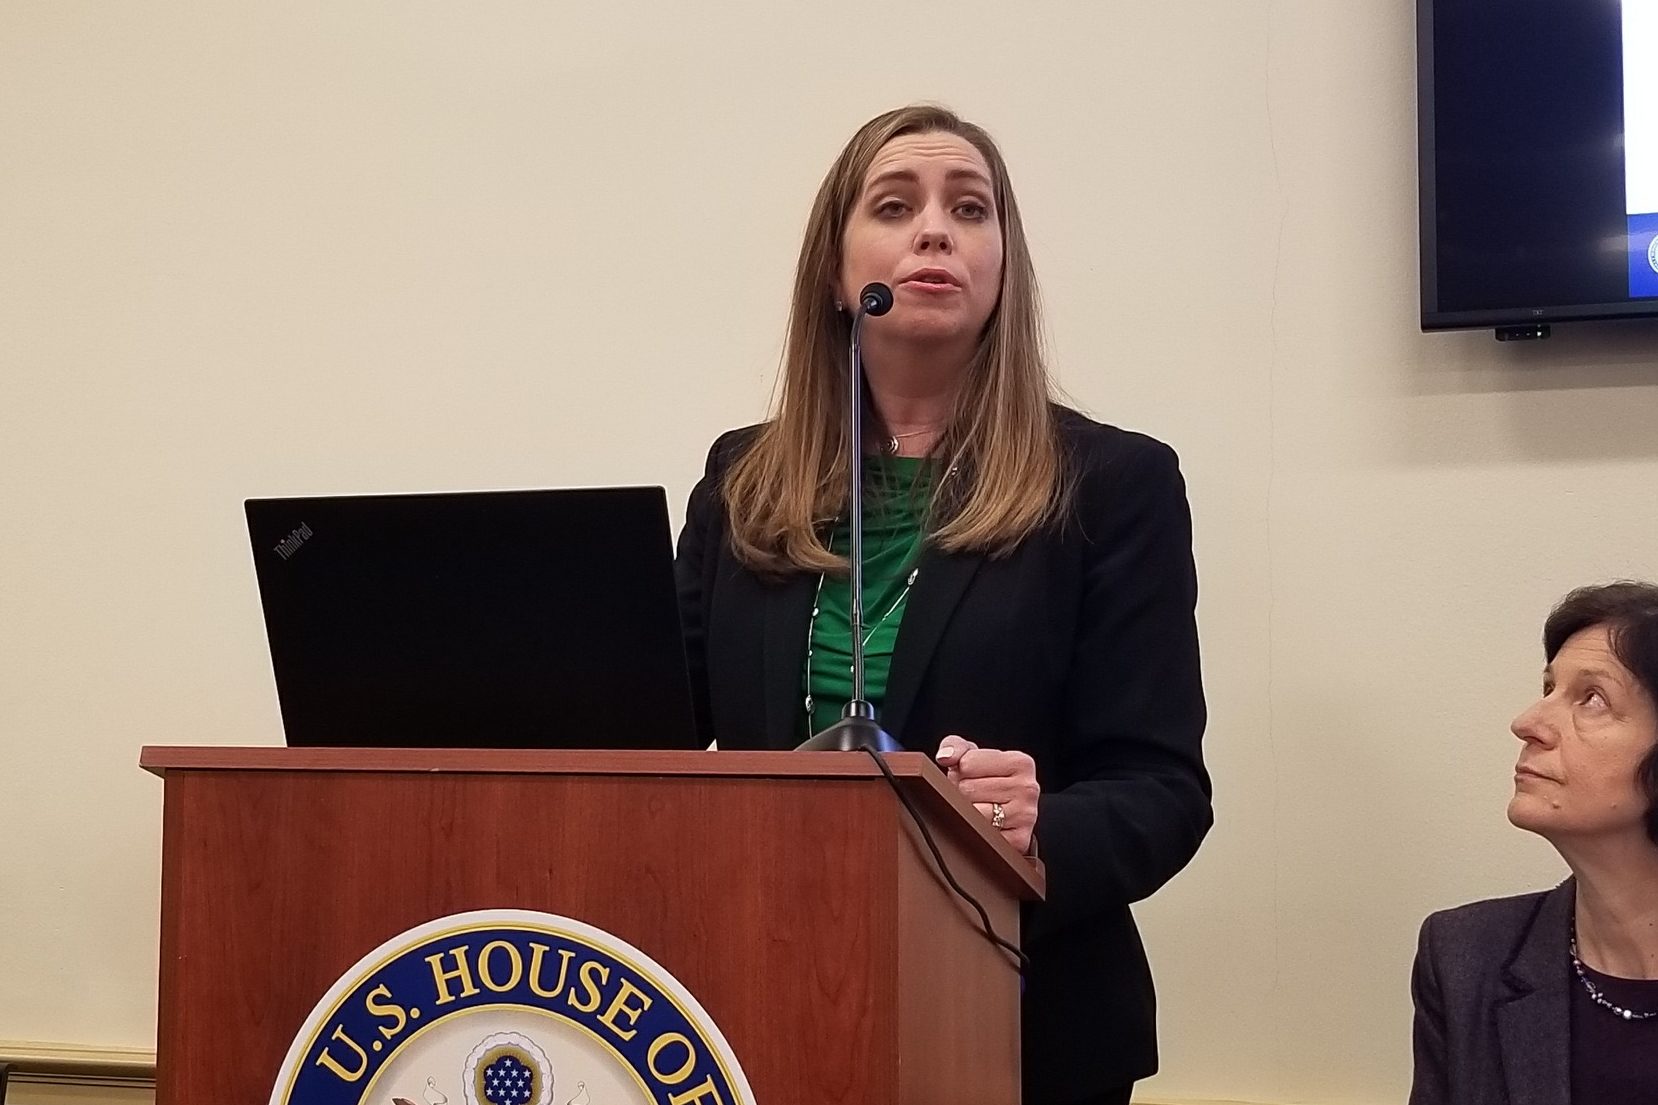 Dr. Lisa Kearney, acting deputy director of suicide prevention at the VA